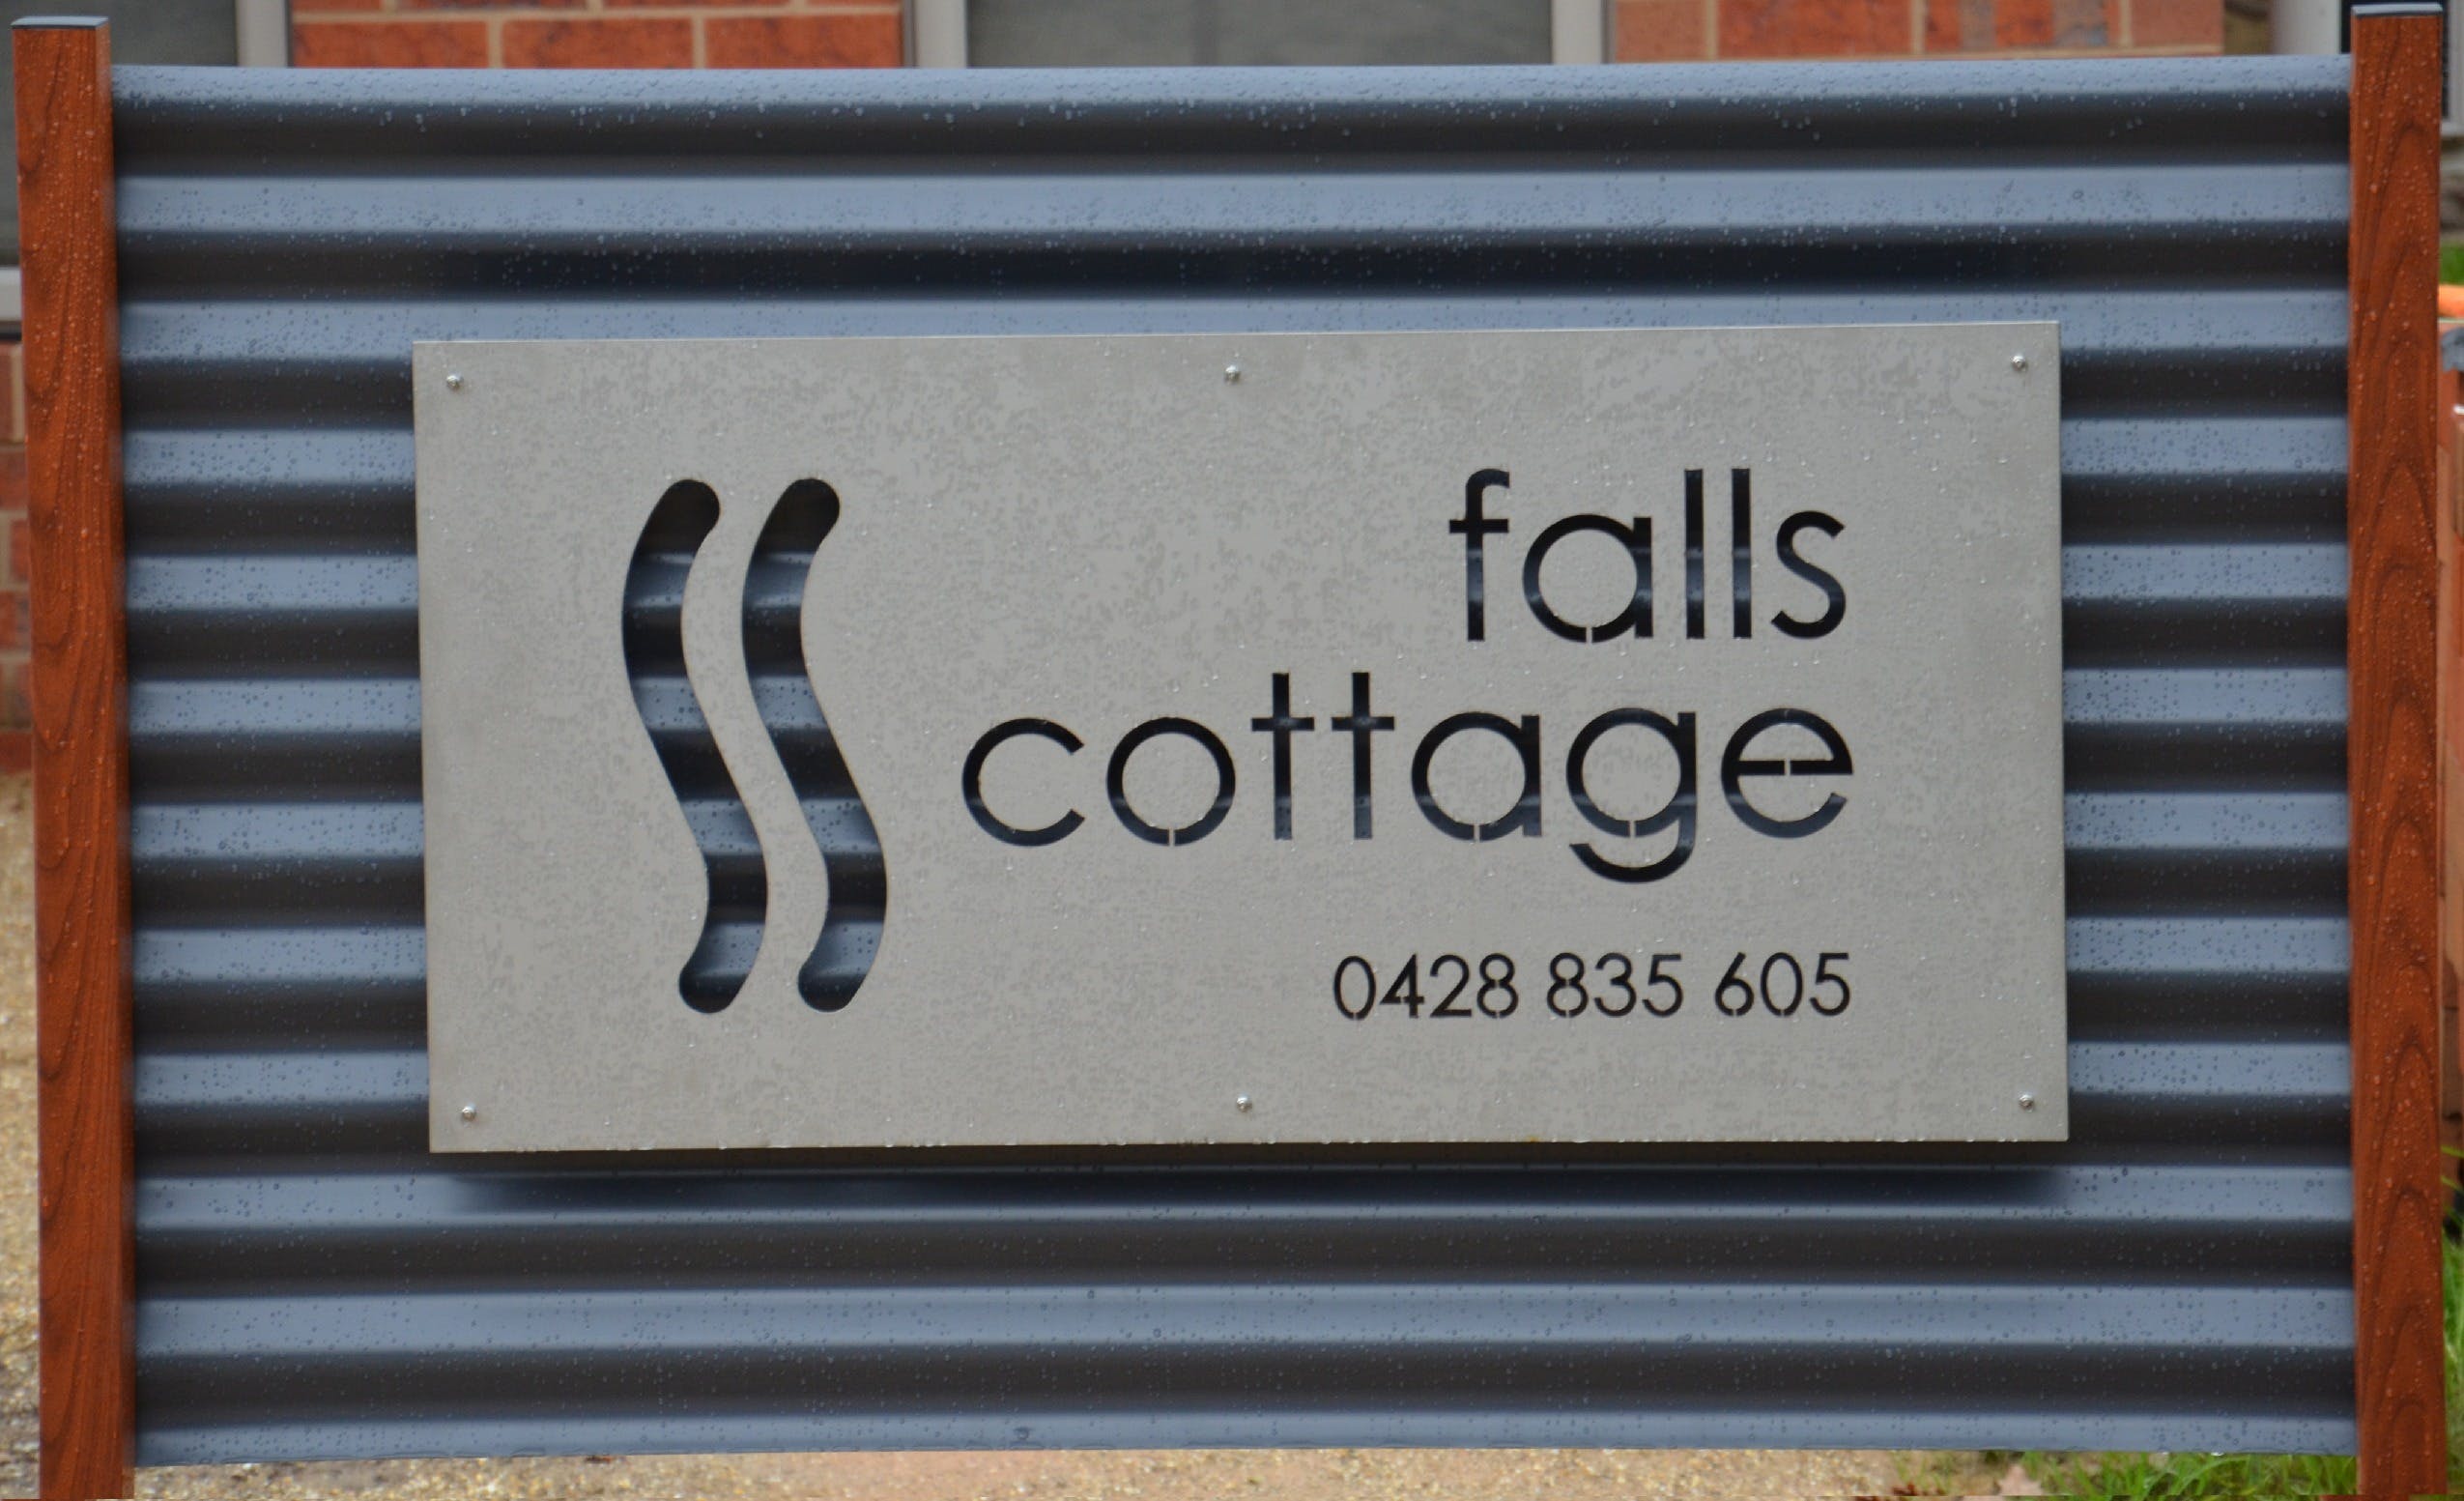 Falls Cottage Whitfield - Accommodation in Brisbane